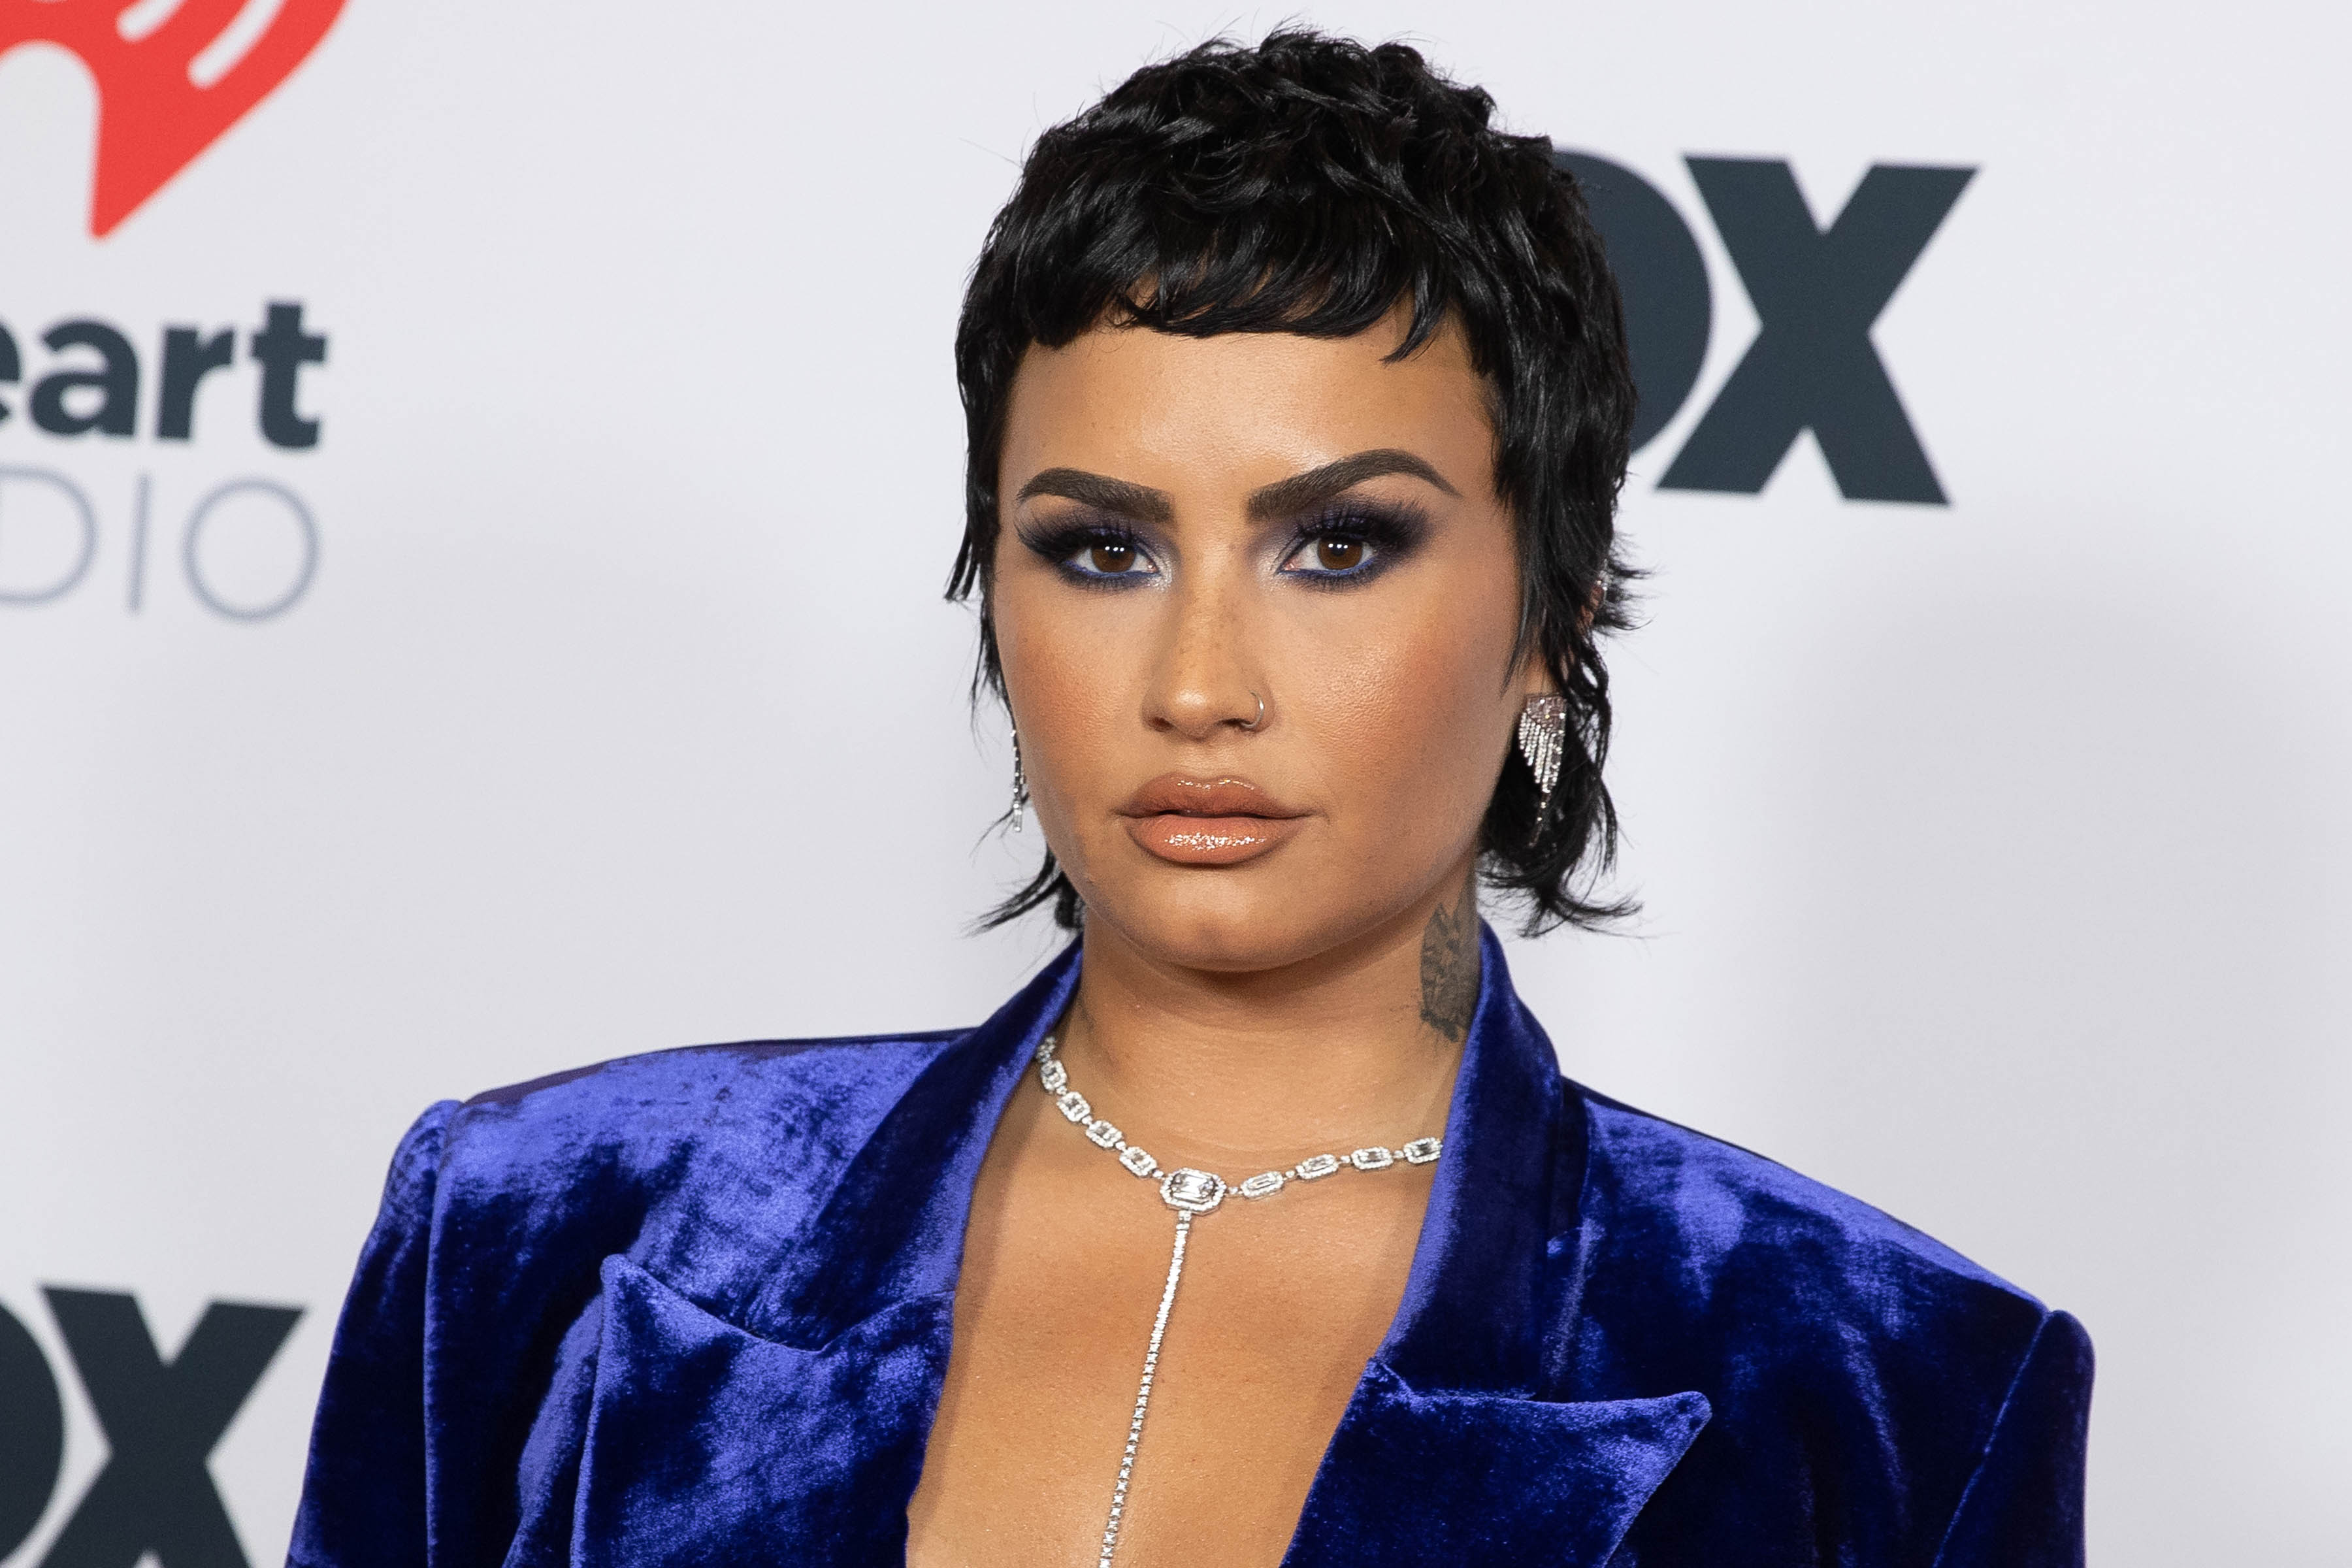 Demi Lovato Calls Out DaBaby Over Harmful & Misleading HIV/AIDS Comments